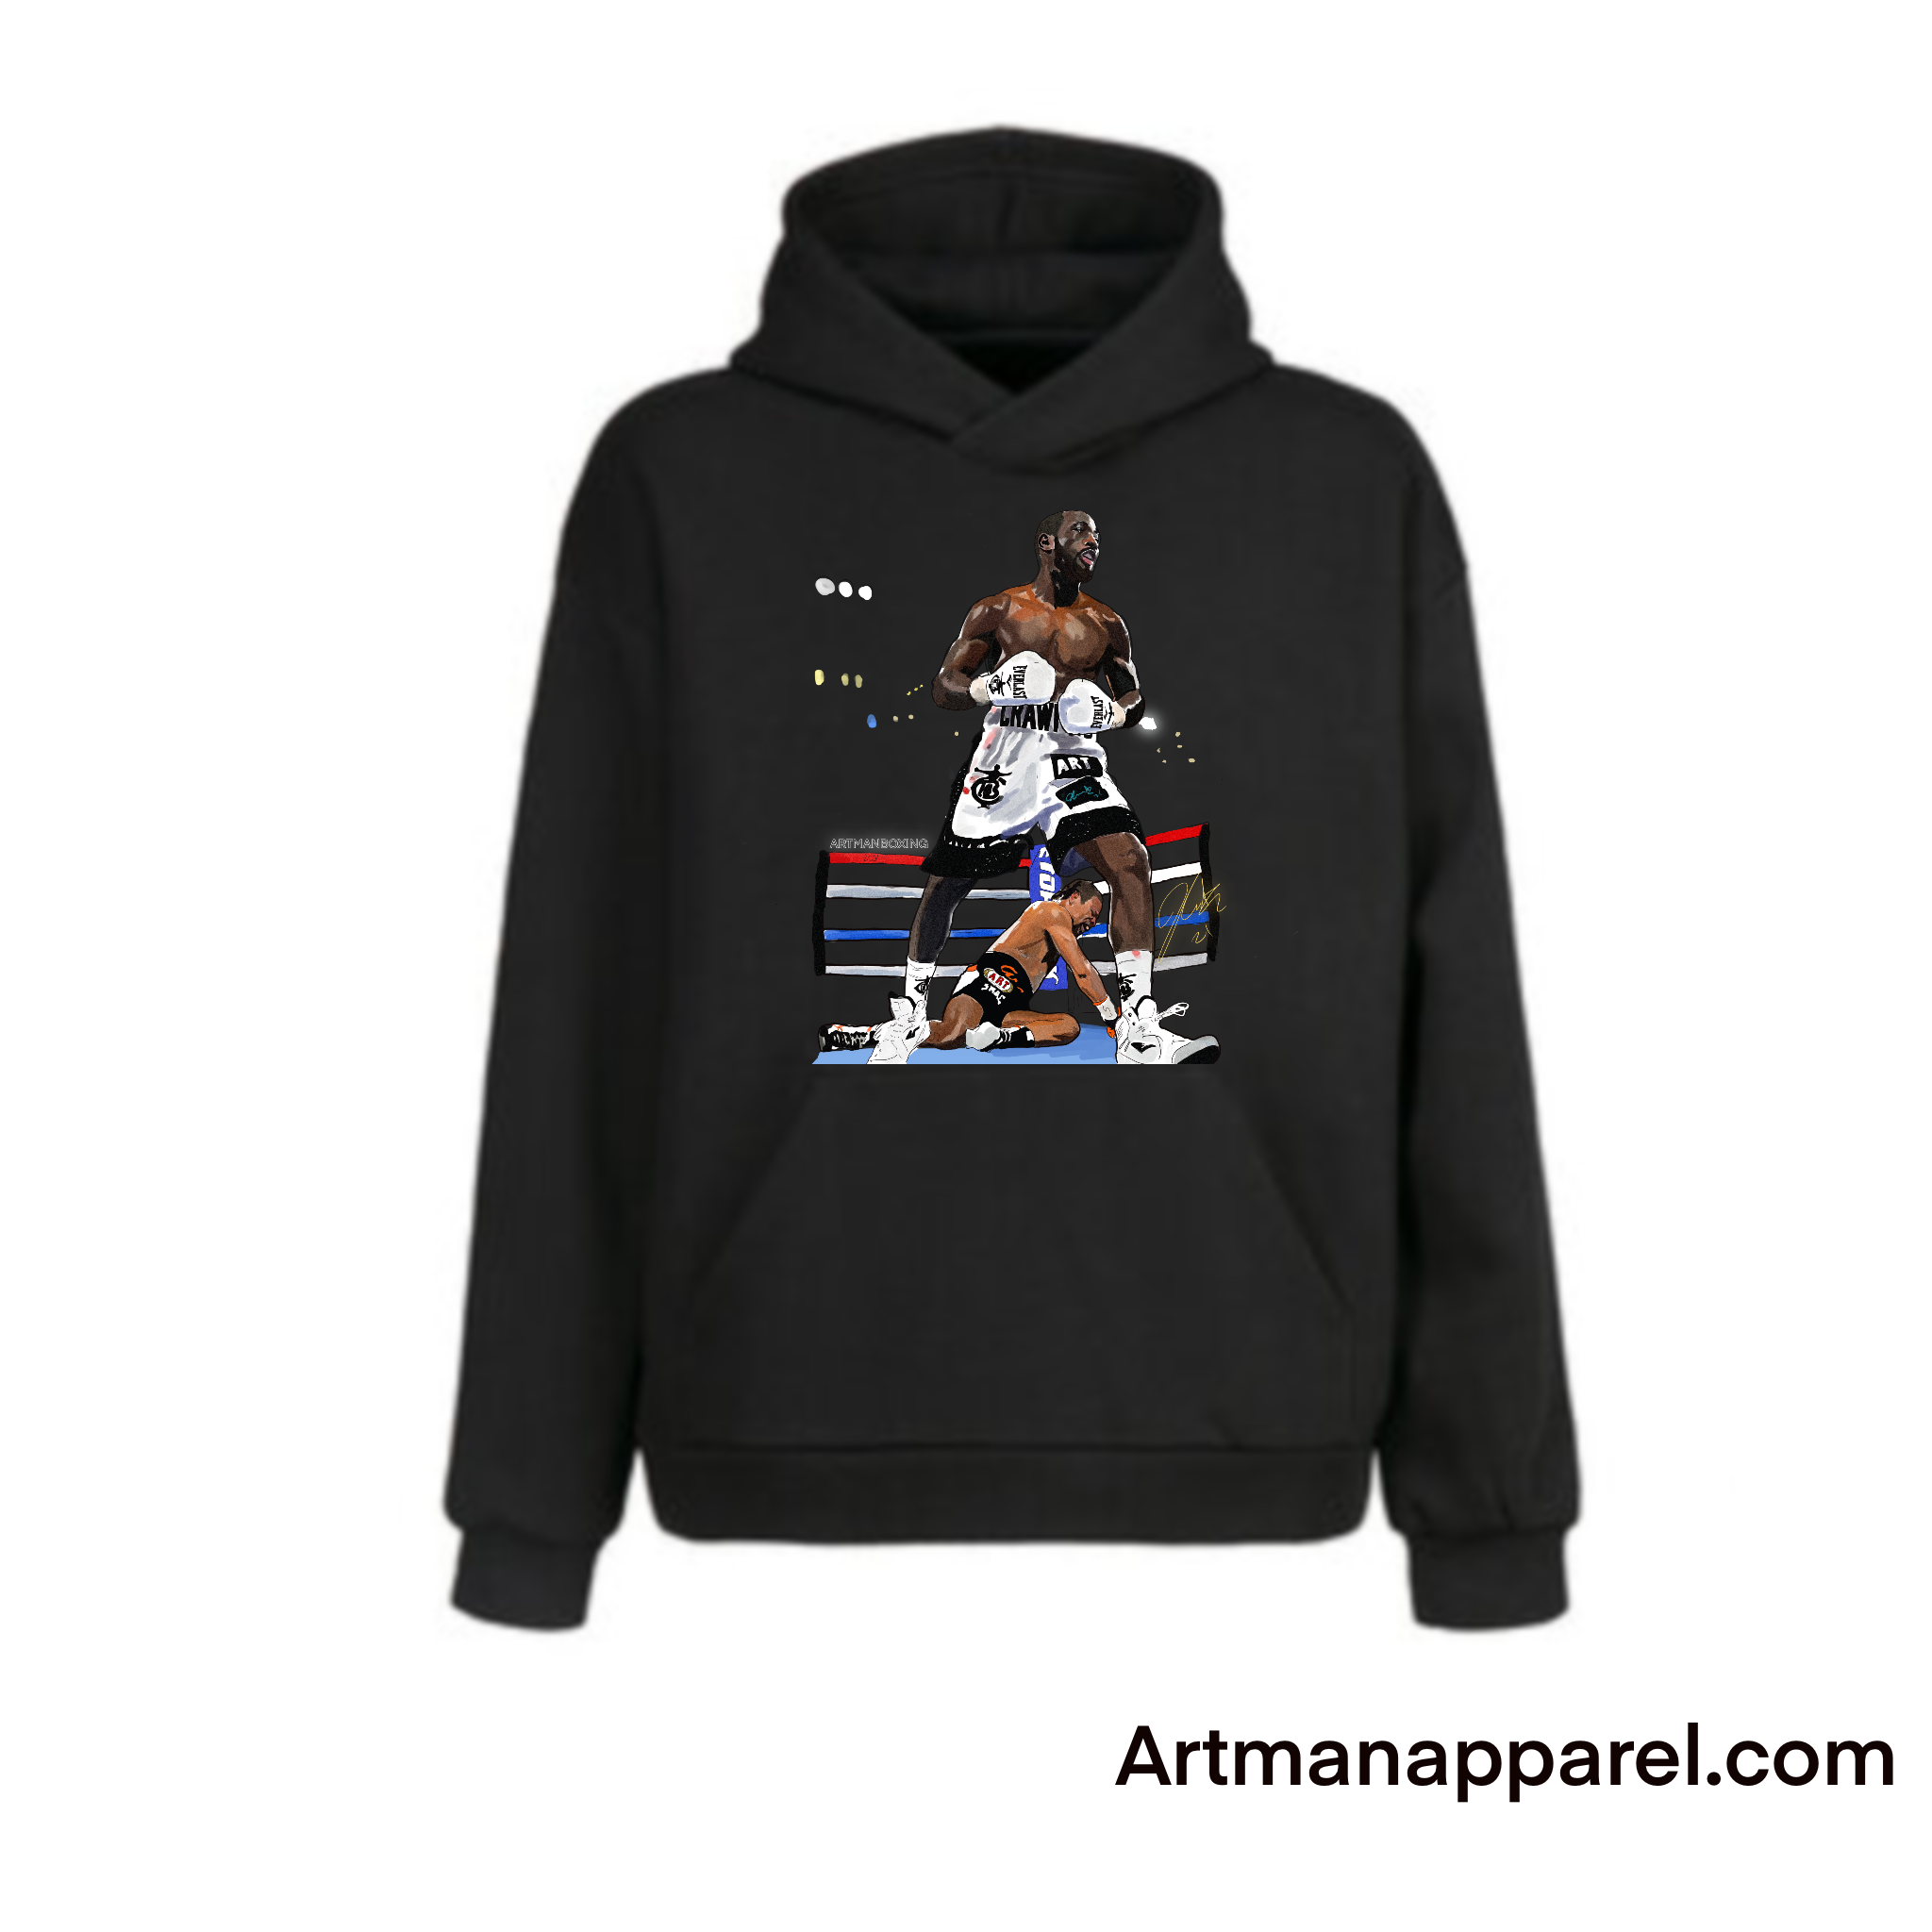 P4p status solidified Blk Hoodie